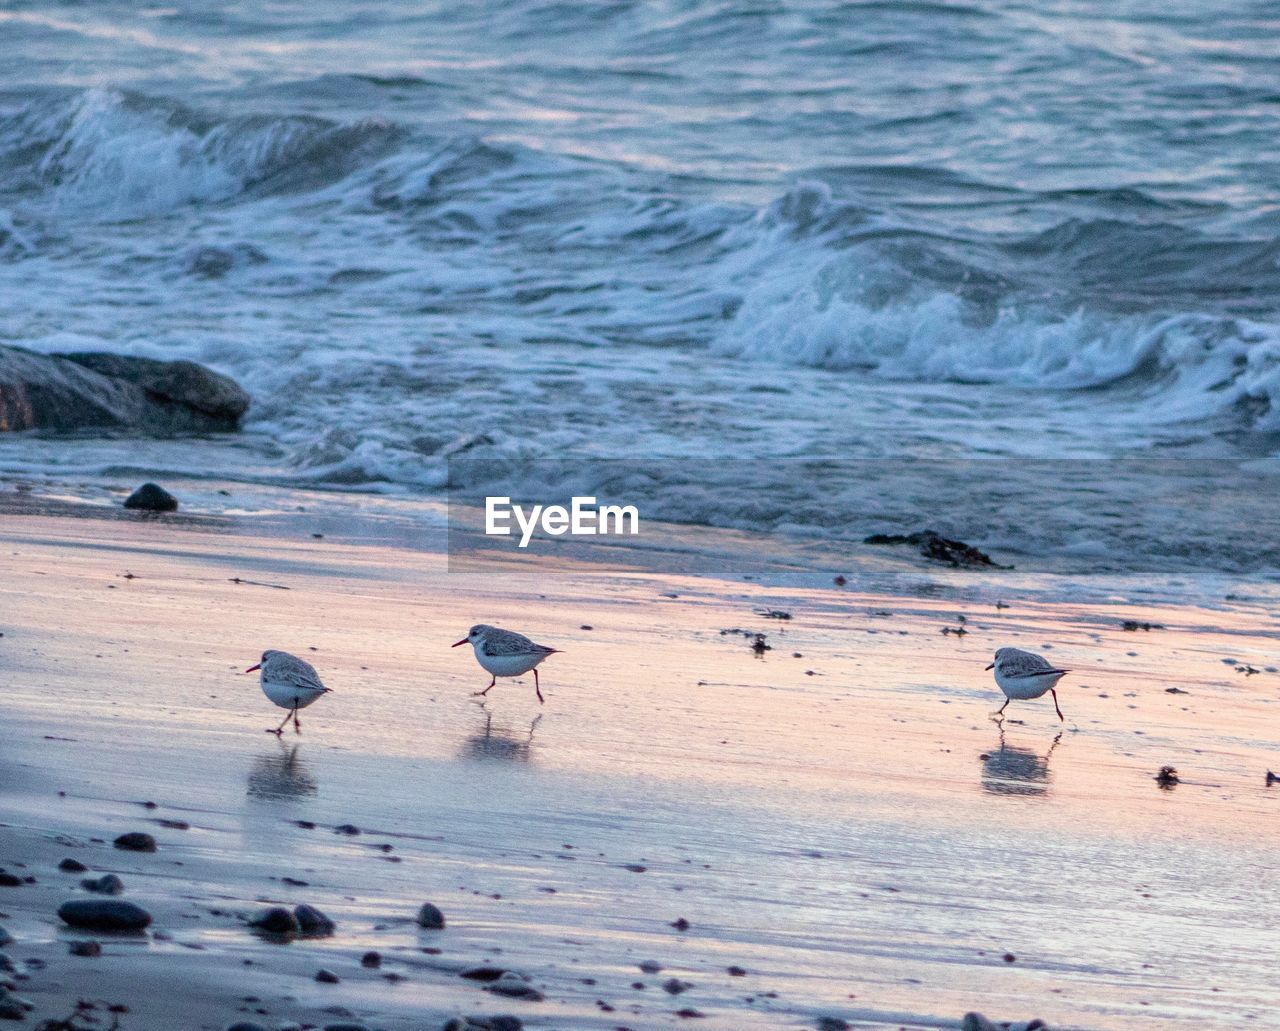 Birds on shore at beach during sunset